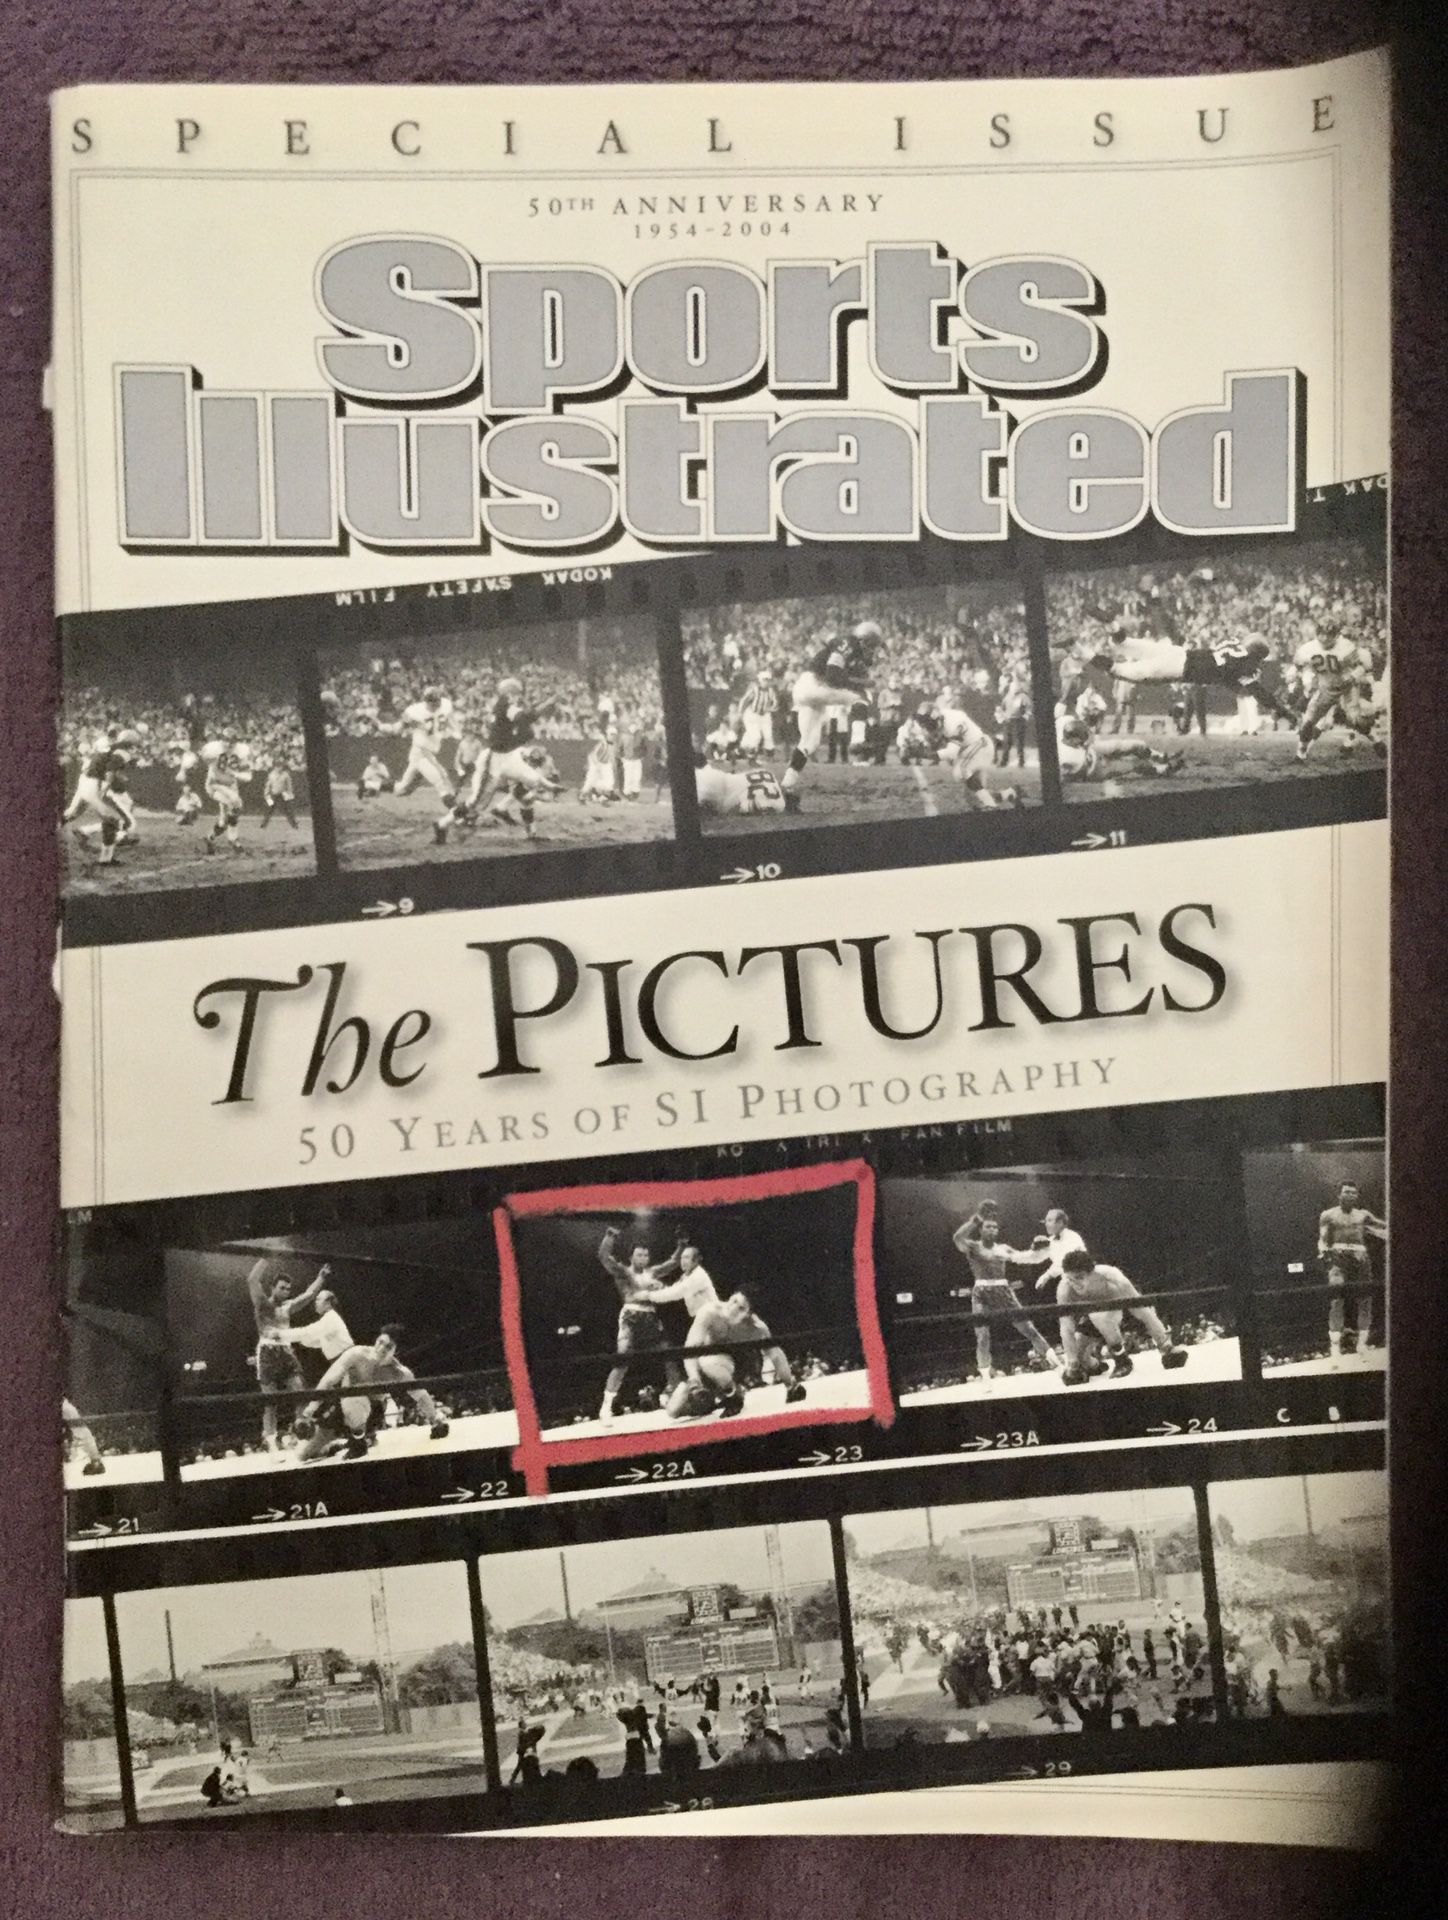 SPORTS-ILLUSTRATED-THE-PICTURES-50-YEARS-OF-SI-PHOTOGRAPHY-SPECIAL-ISSUE